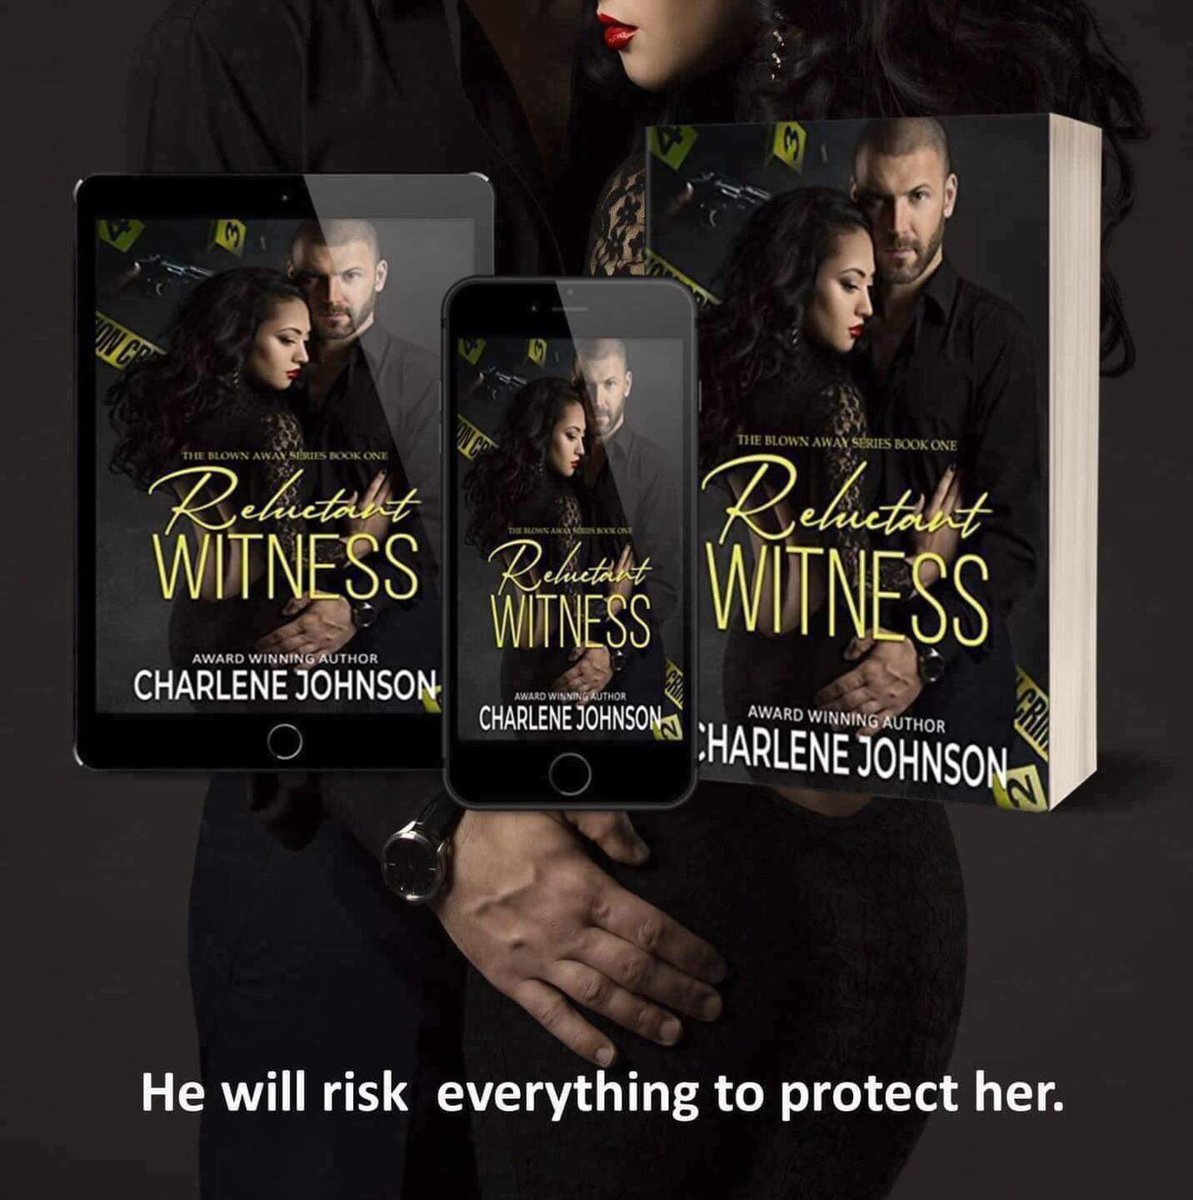 **Available in Kindle Unlimited ** Reluctant Witness by Charlene Johnson

Amazon: amzn.to/3B9MYZW

#newreleases  #kingstonpublishing #kpdesigns #kindleunlimited #charlenejohnson #reluctantwitness #romance #contemporary #thriller #murderthriller